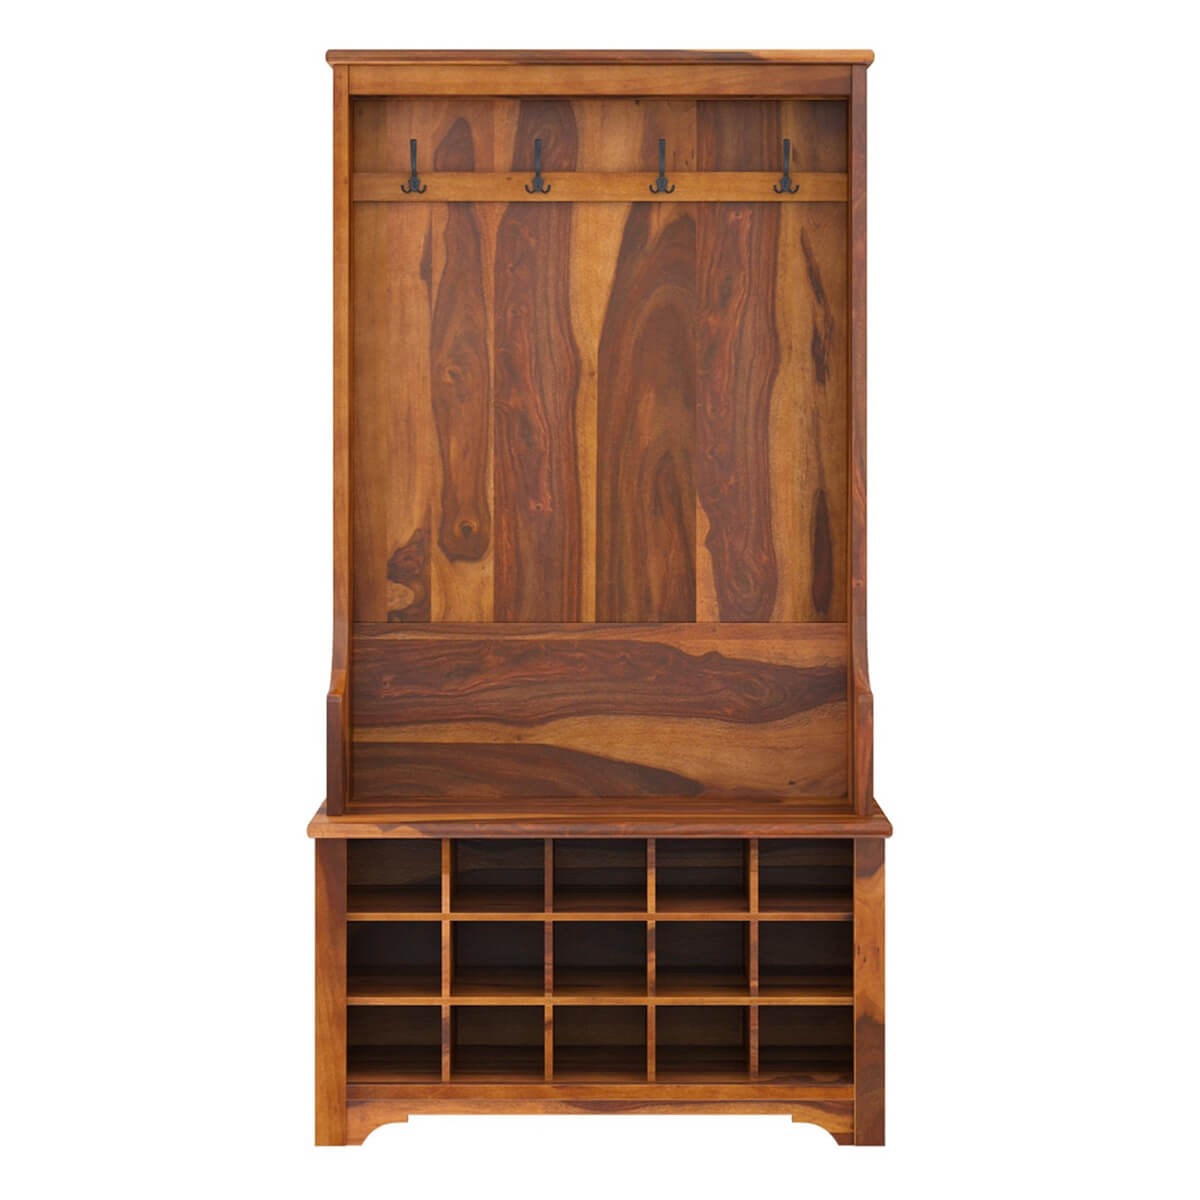 Cornish rustic solid wood entryway hall tree with shoe storage